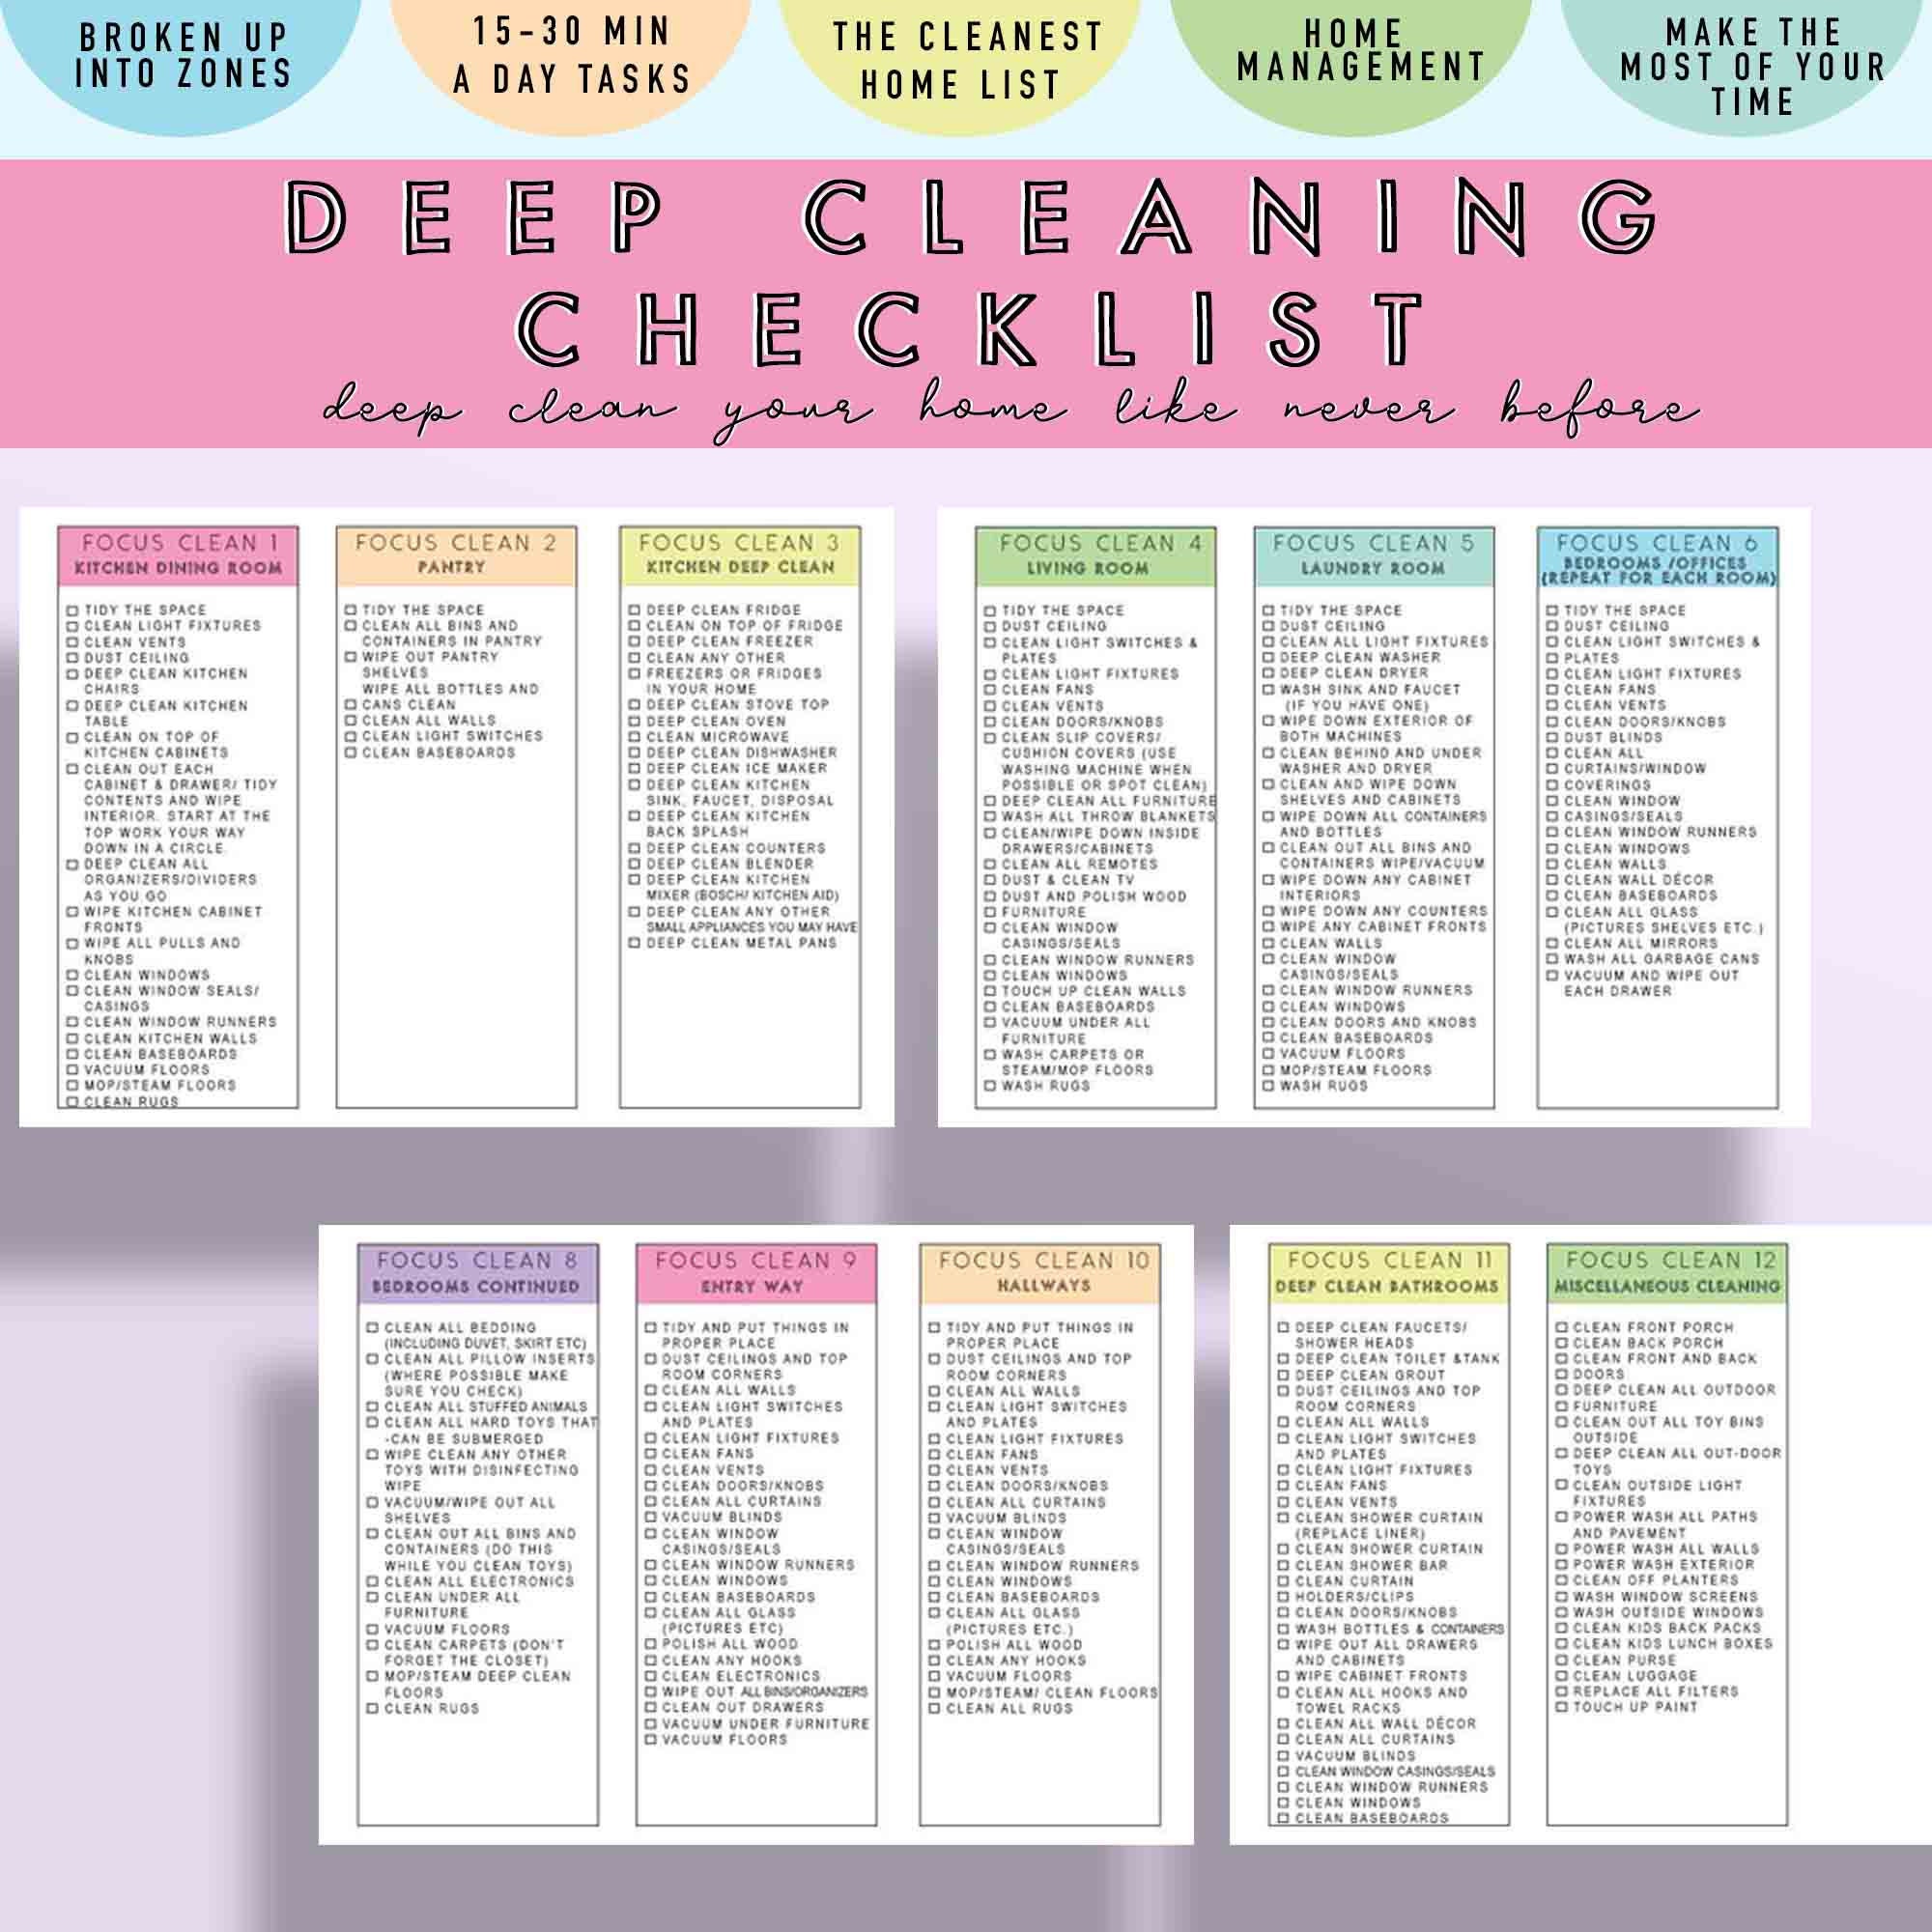 The House Cleaning Supplies Checklist (You Must Have These) (March 2022)